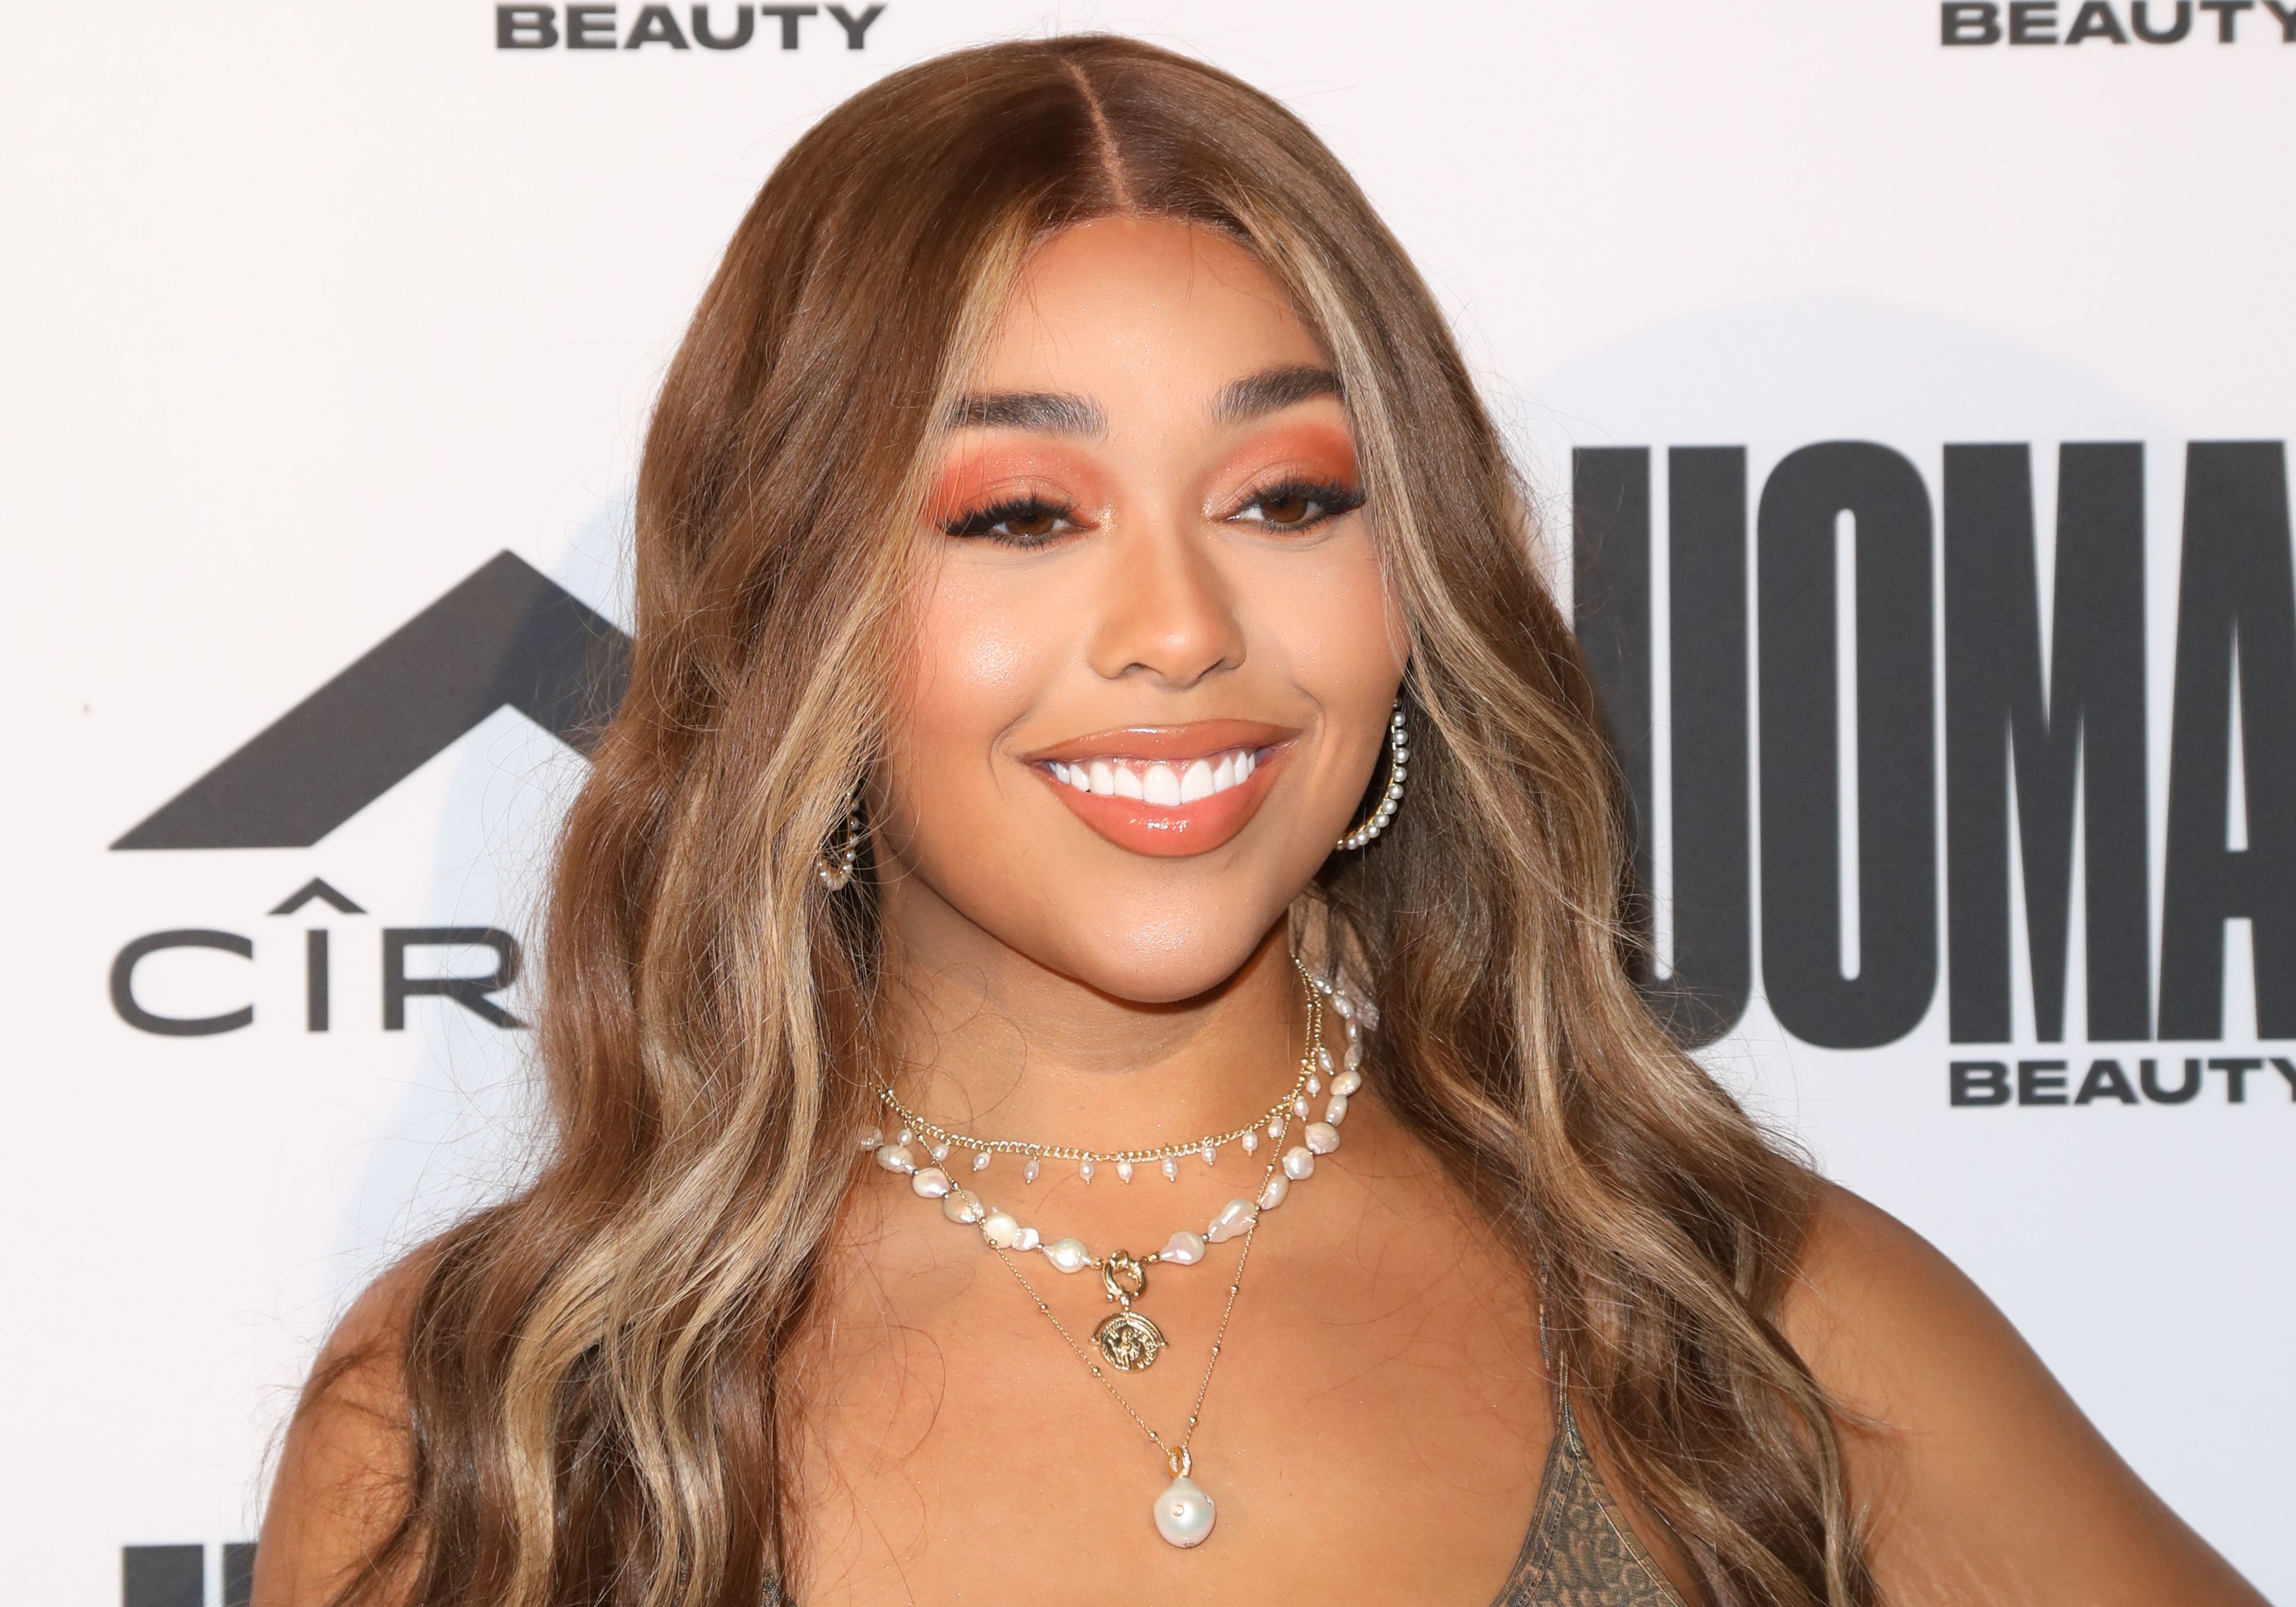 Jordyn Woods during the UOMA Summer House LA at a Private Residence on August 10, 2019 in Beverly Hills, California. | Source: Getty Images